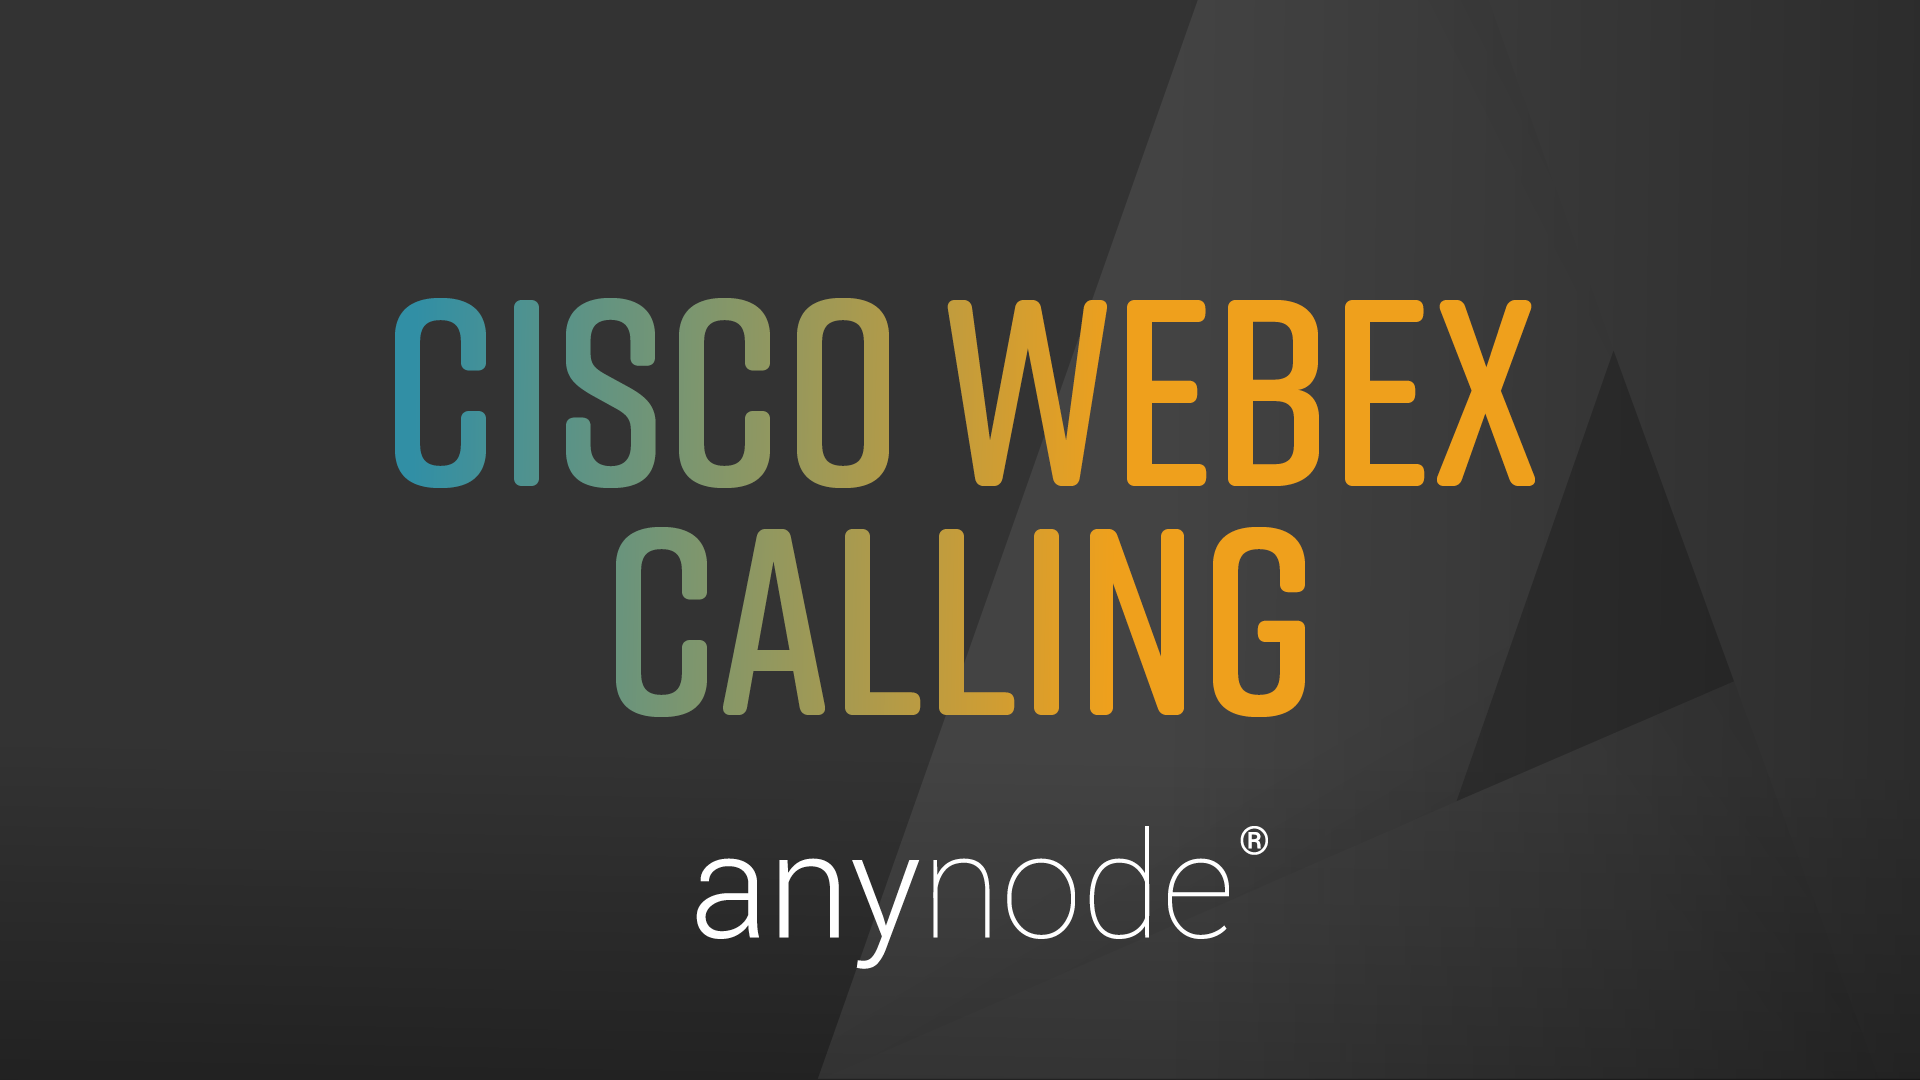 anynode is certified for Cisco Webex Calling Peering. With Cisco Webex Calling, anynode can be connected to almost any PSTN or connected to third-party PBXs.